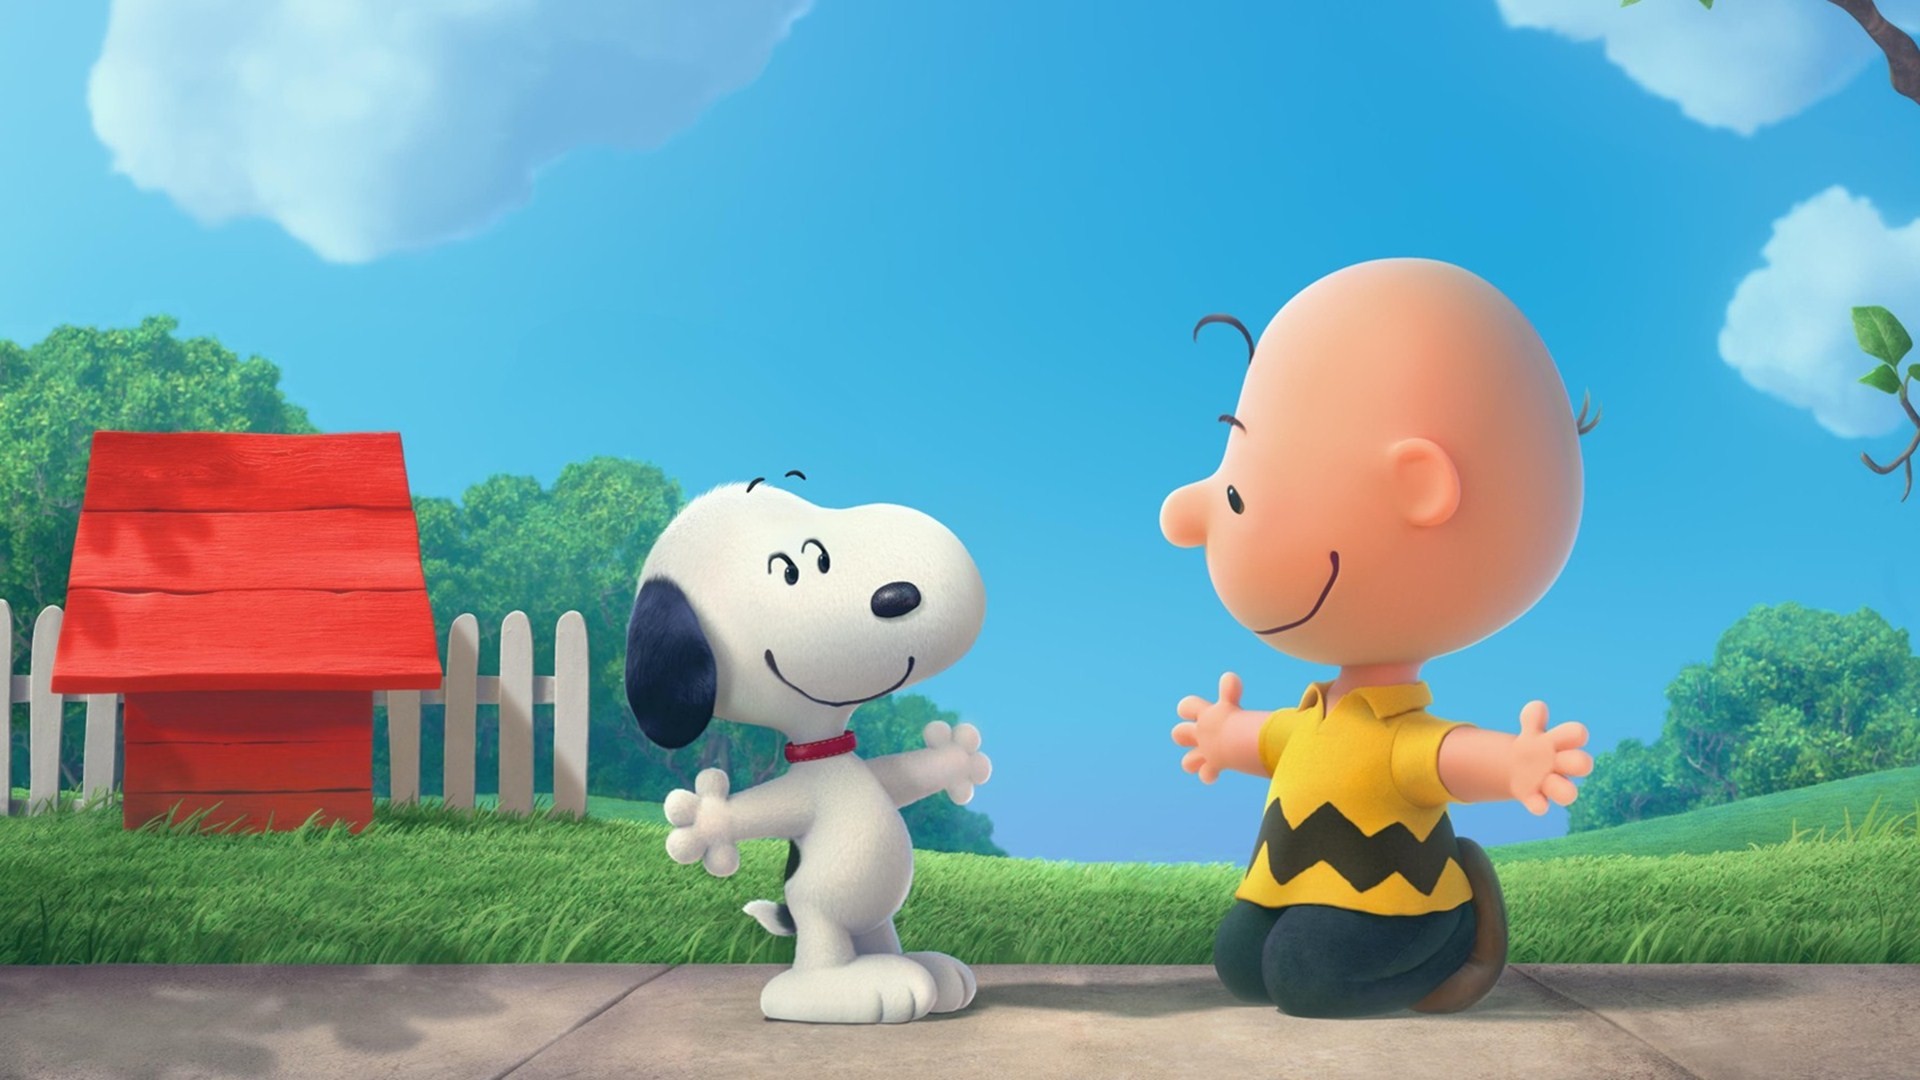 1920x1080 And Charlie Brown The Peanuts Cartoon HD Wallpaper Search more high  